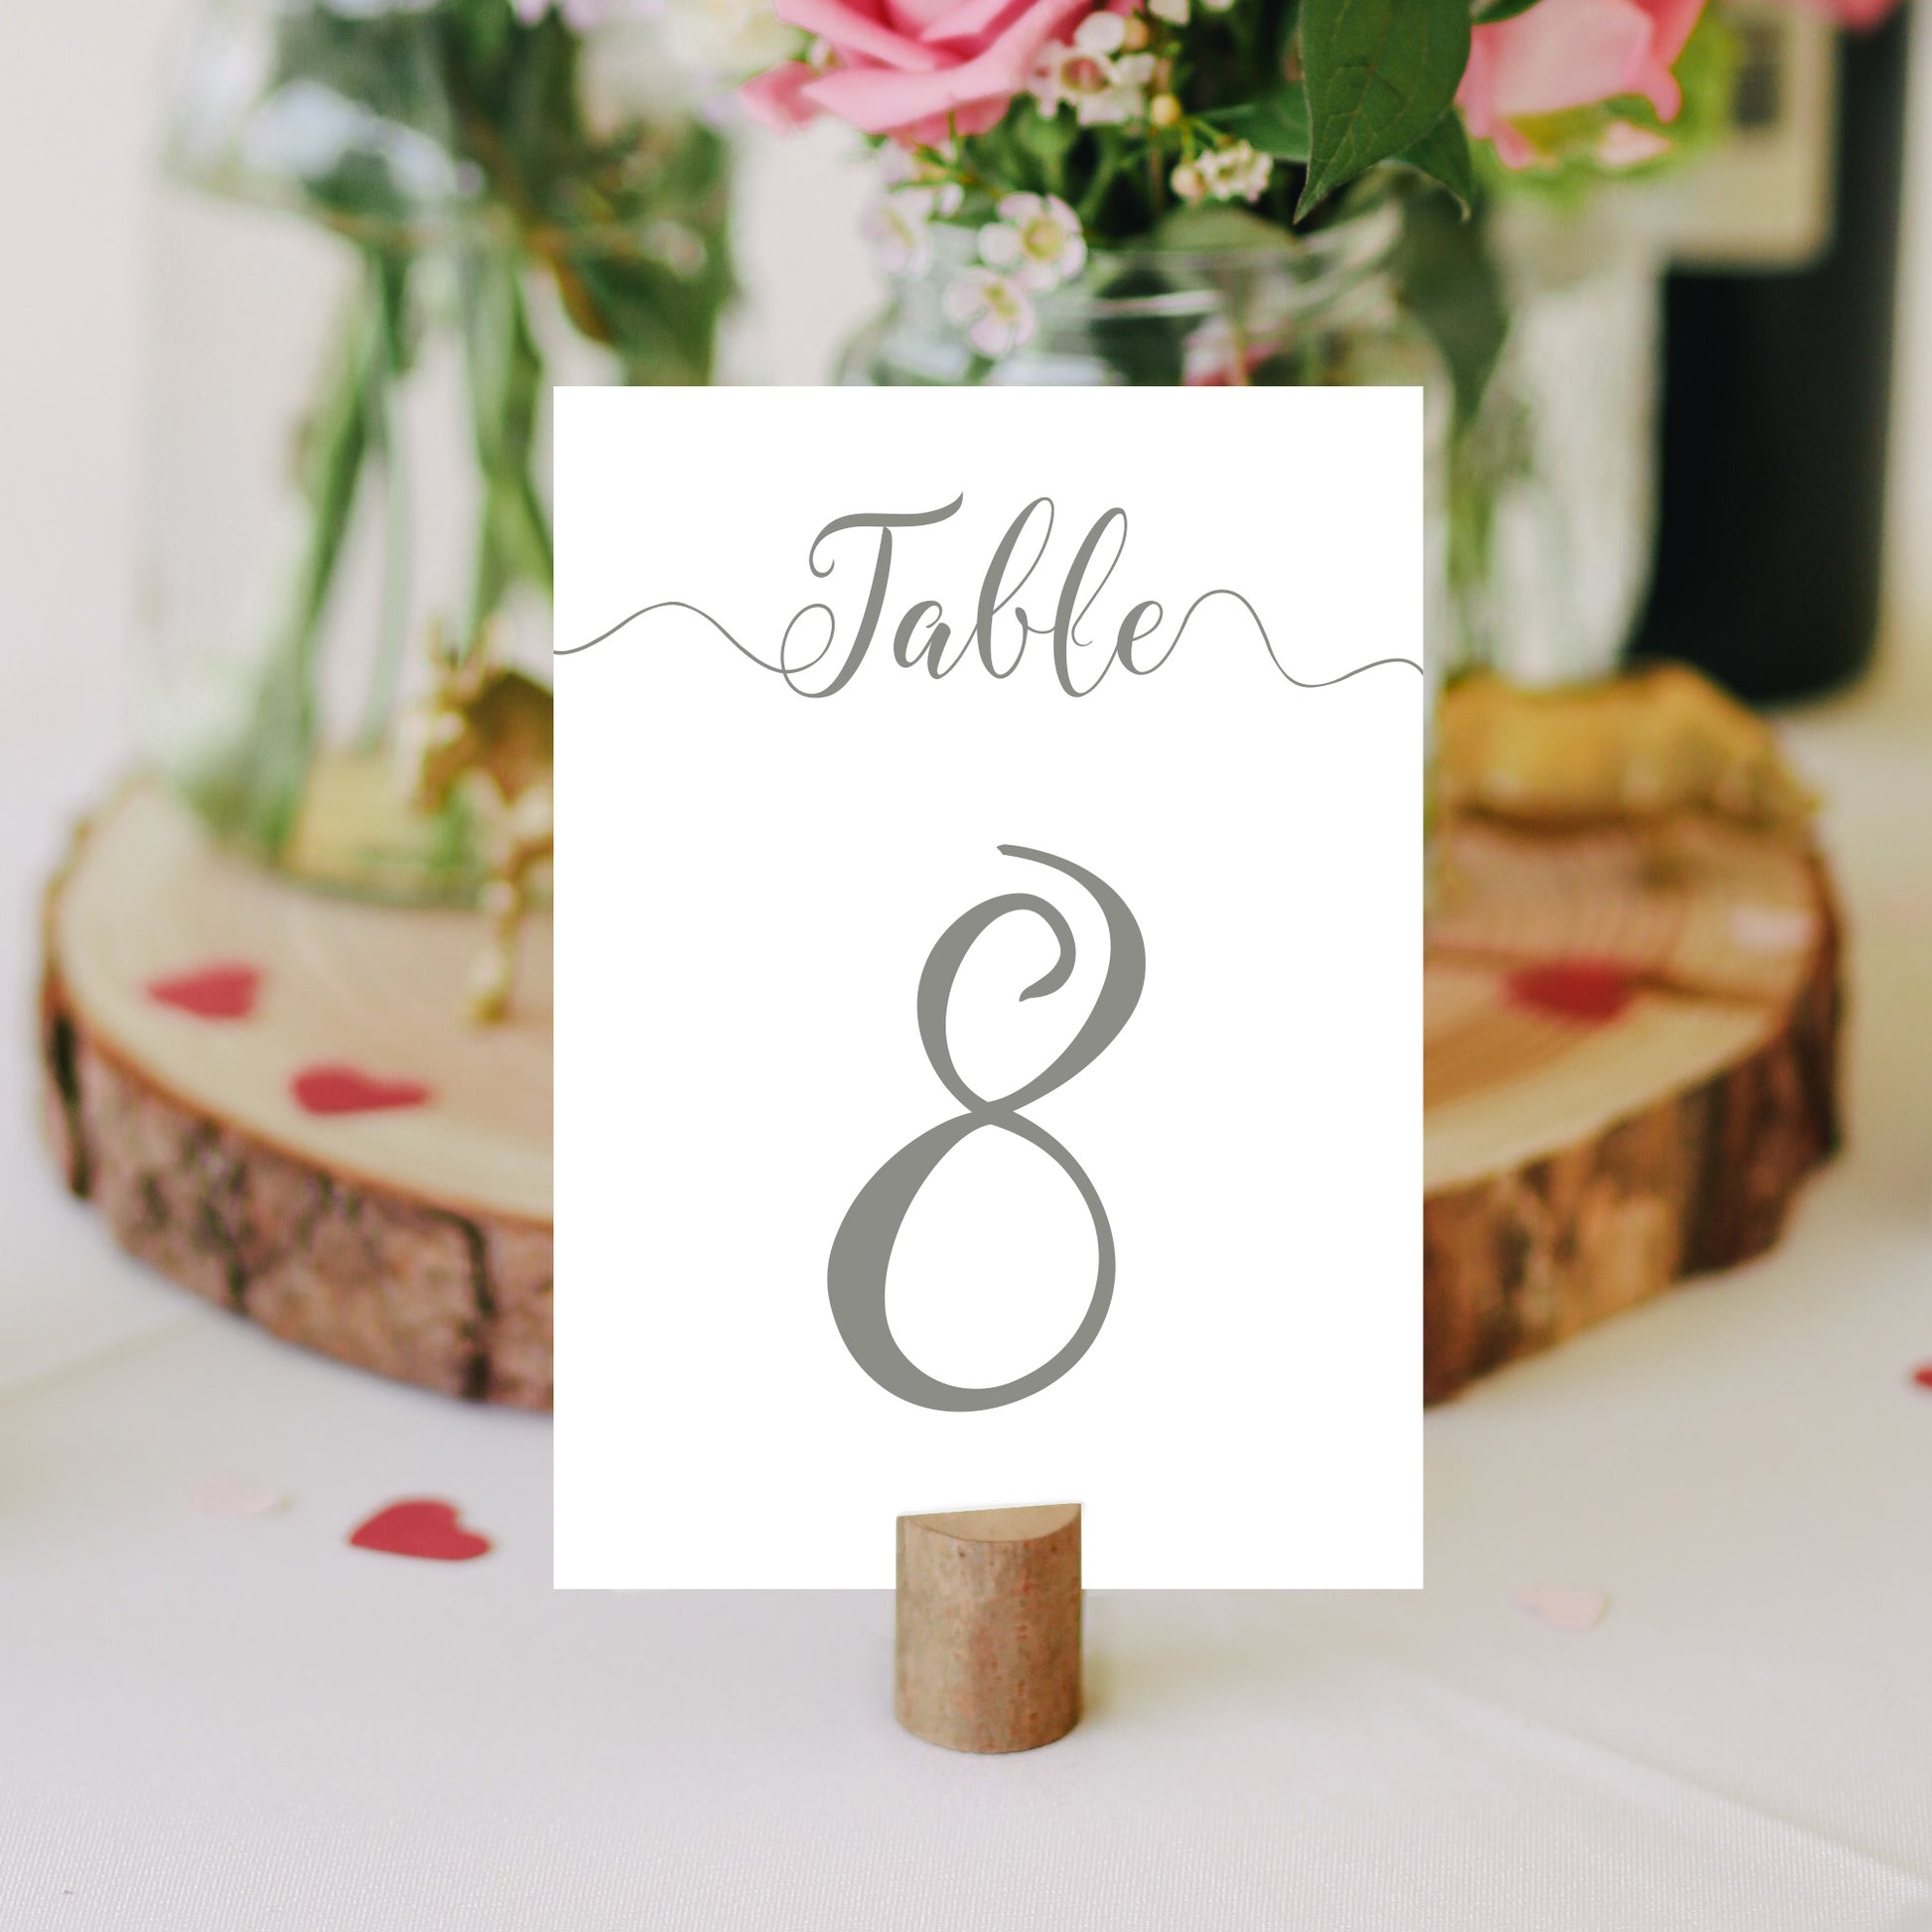 artichoke green table number on a wedding table